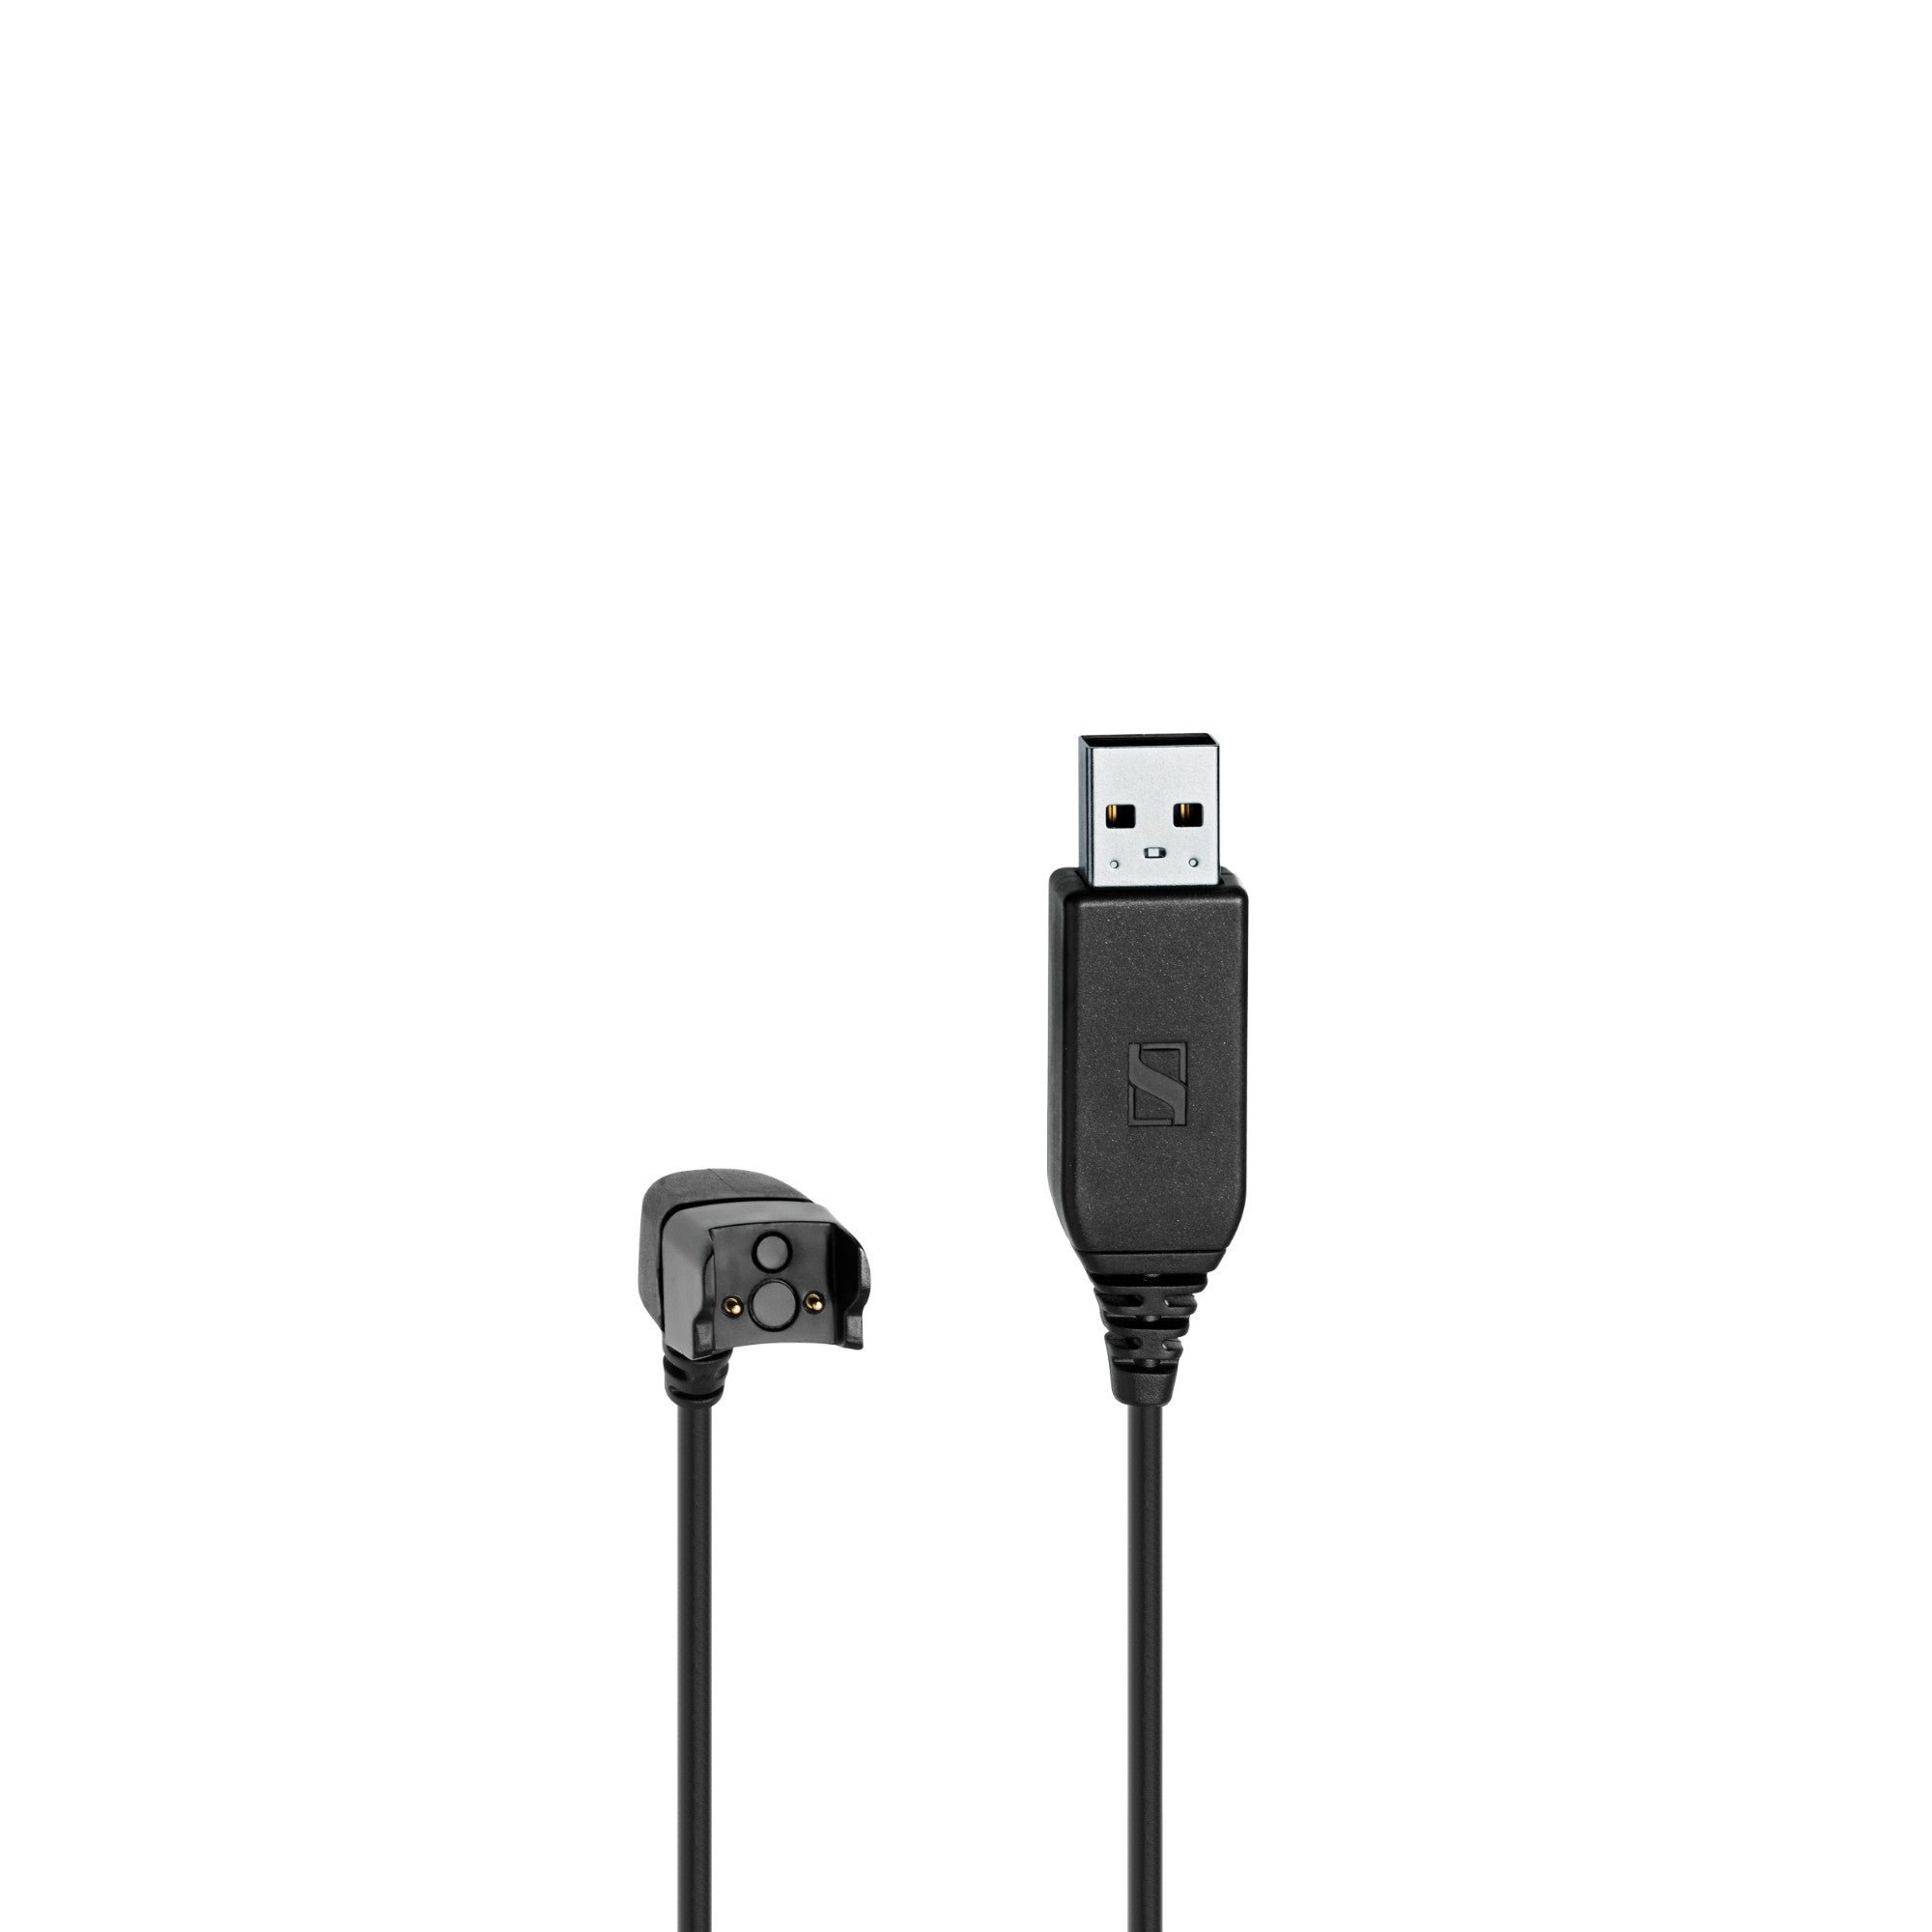 CH 30 USB Charging Cable